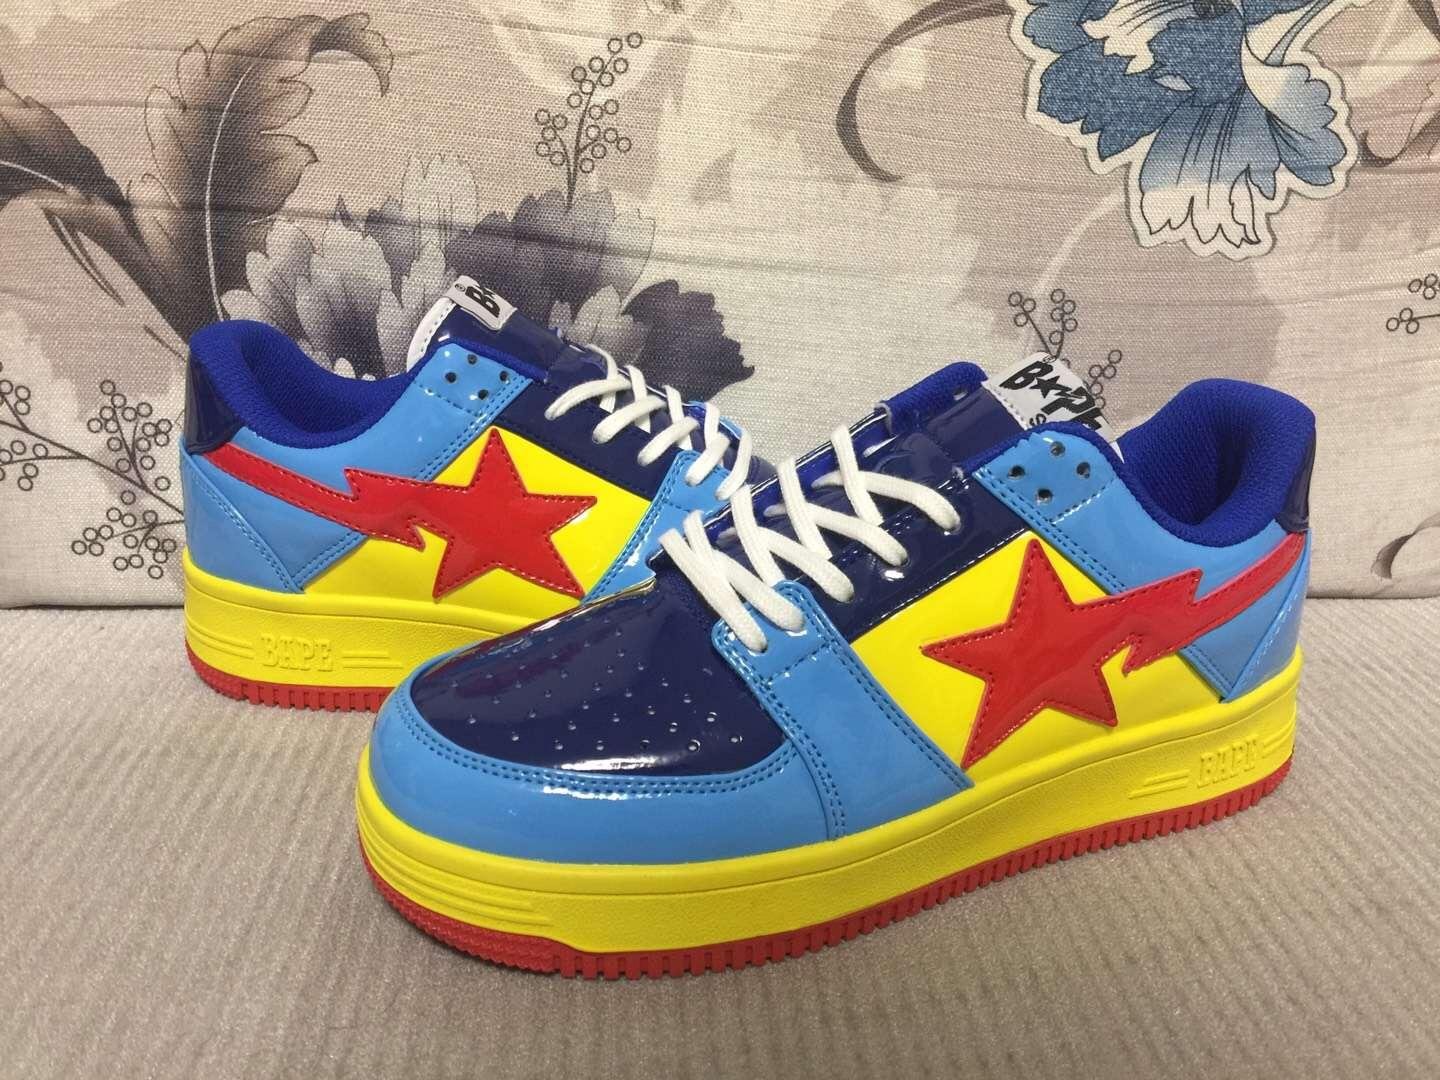 2019 BAPE STA “Cotton Candy” wholesale bape star shoes hot selling shoes -  BAPE STAR (China Trading Company) - Athletic & Sports Shoes -